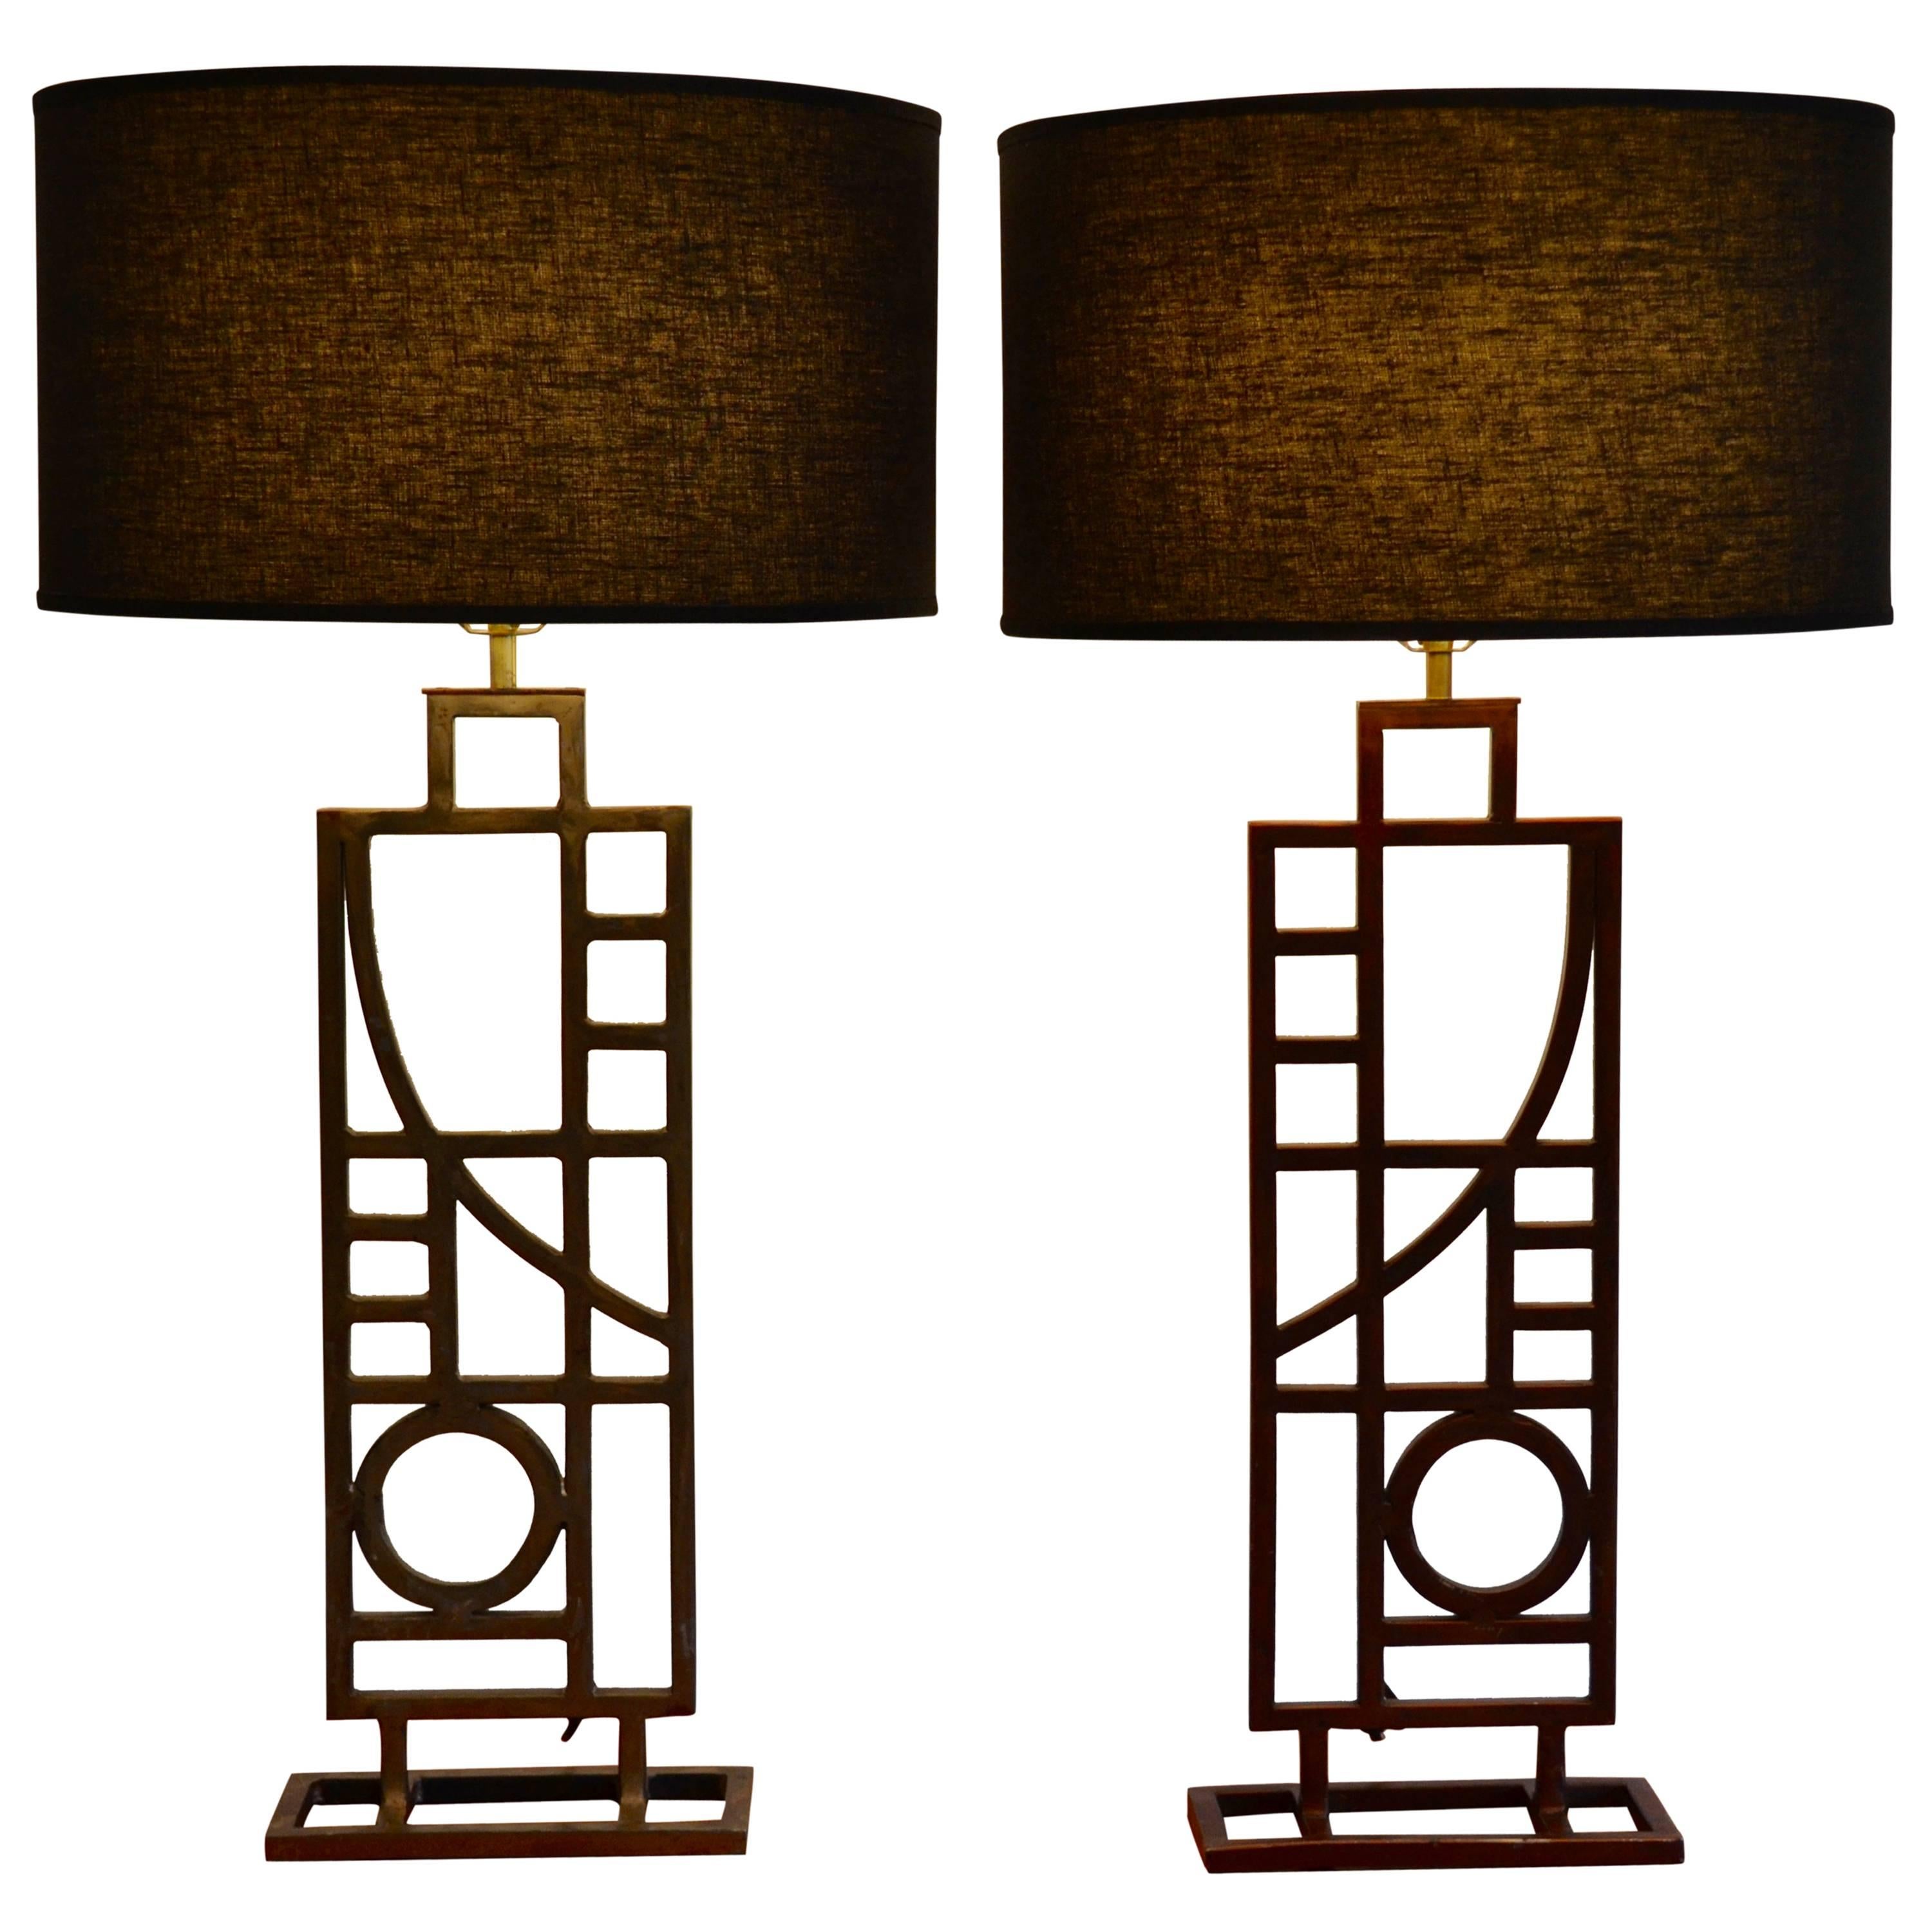 Pair of Mid Century Modern Nickel and Copper Table Lamps by Robert Sonneman